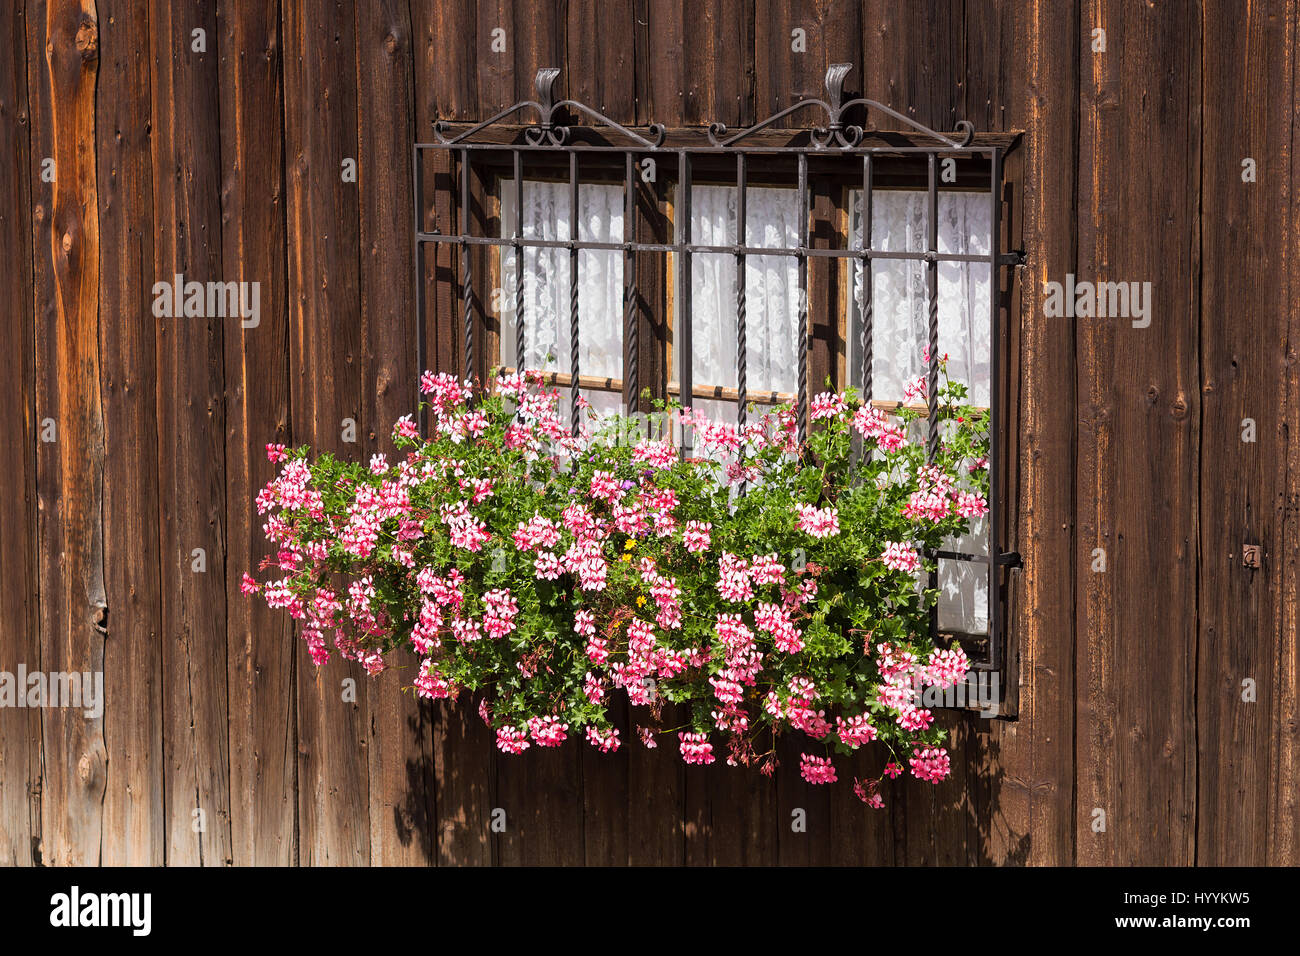 Barred window with flowers in ancient country house with rough wooden walls. Traditional wabi-sabi aesthetic worldview. Stock Photo